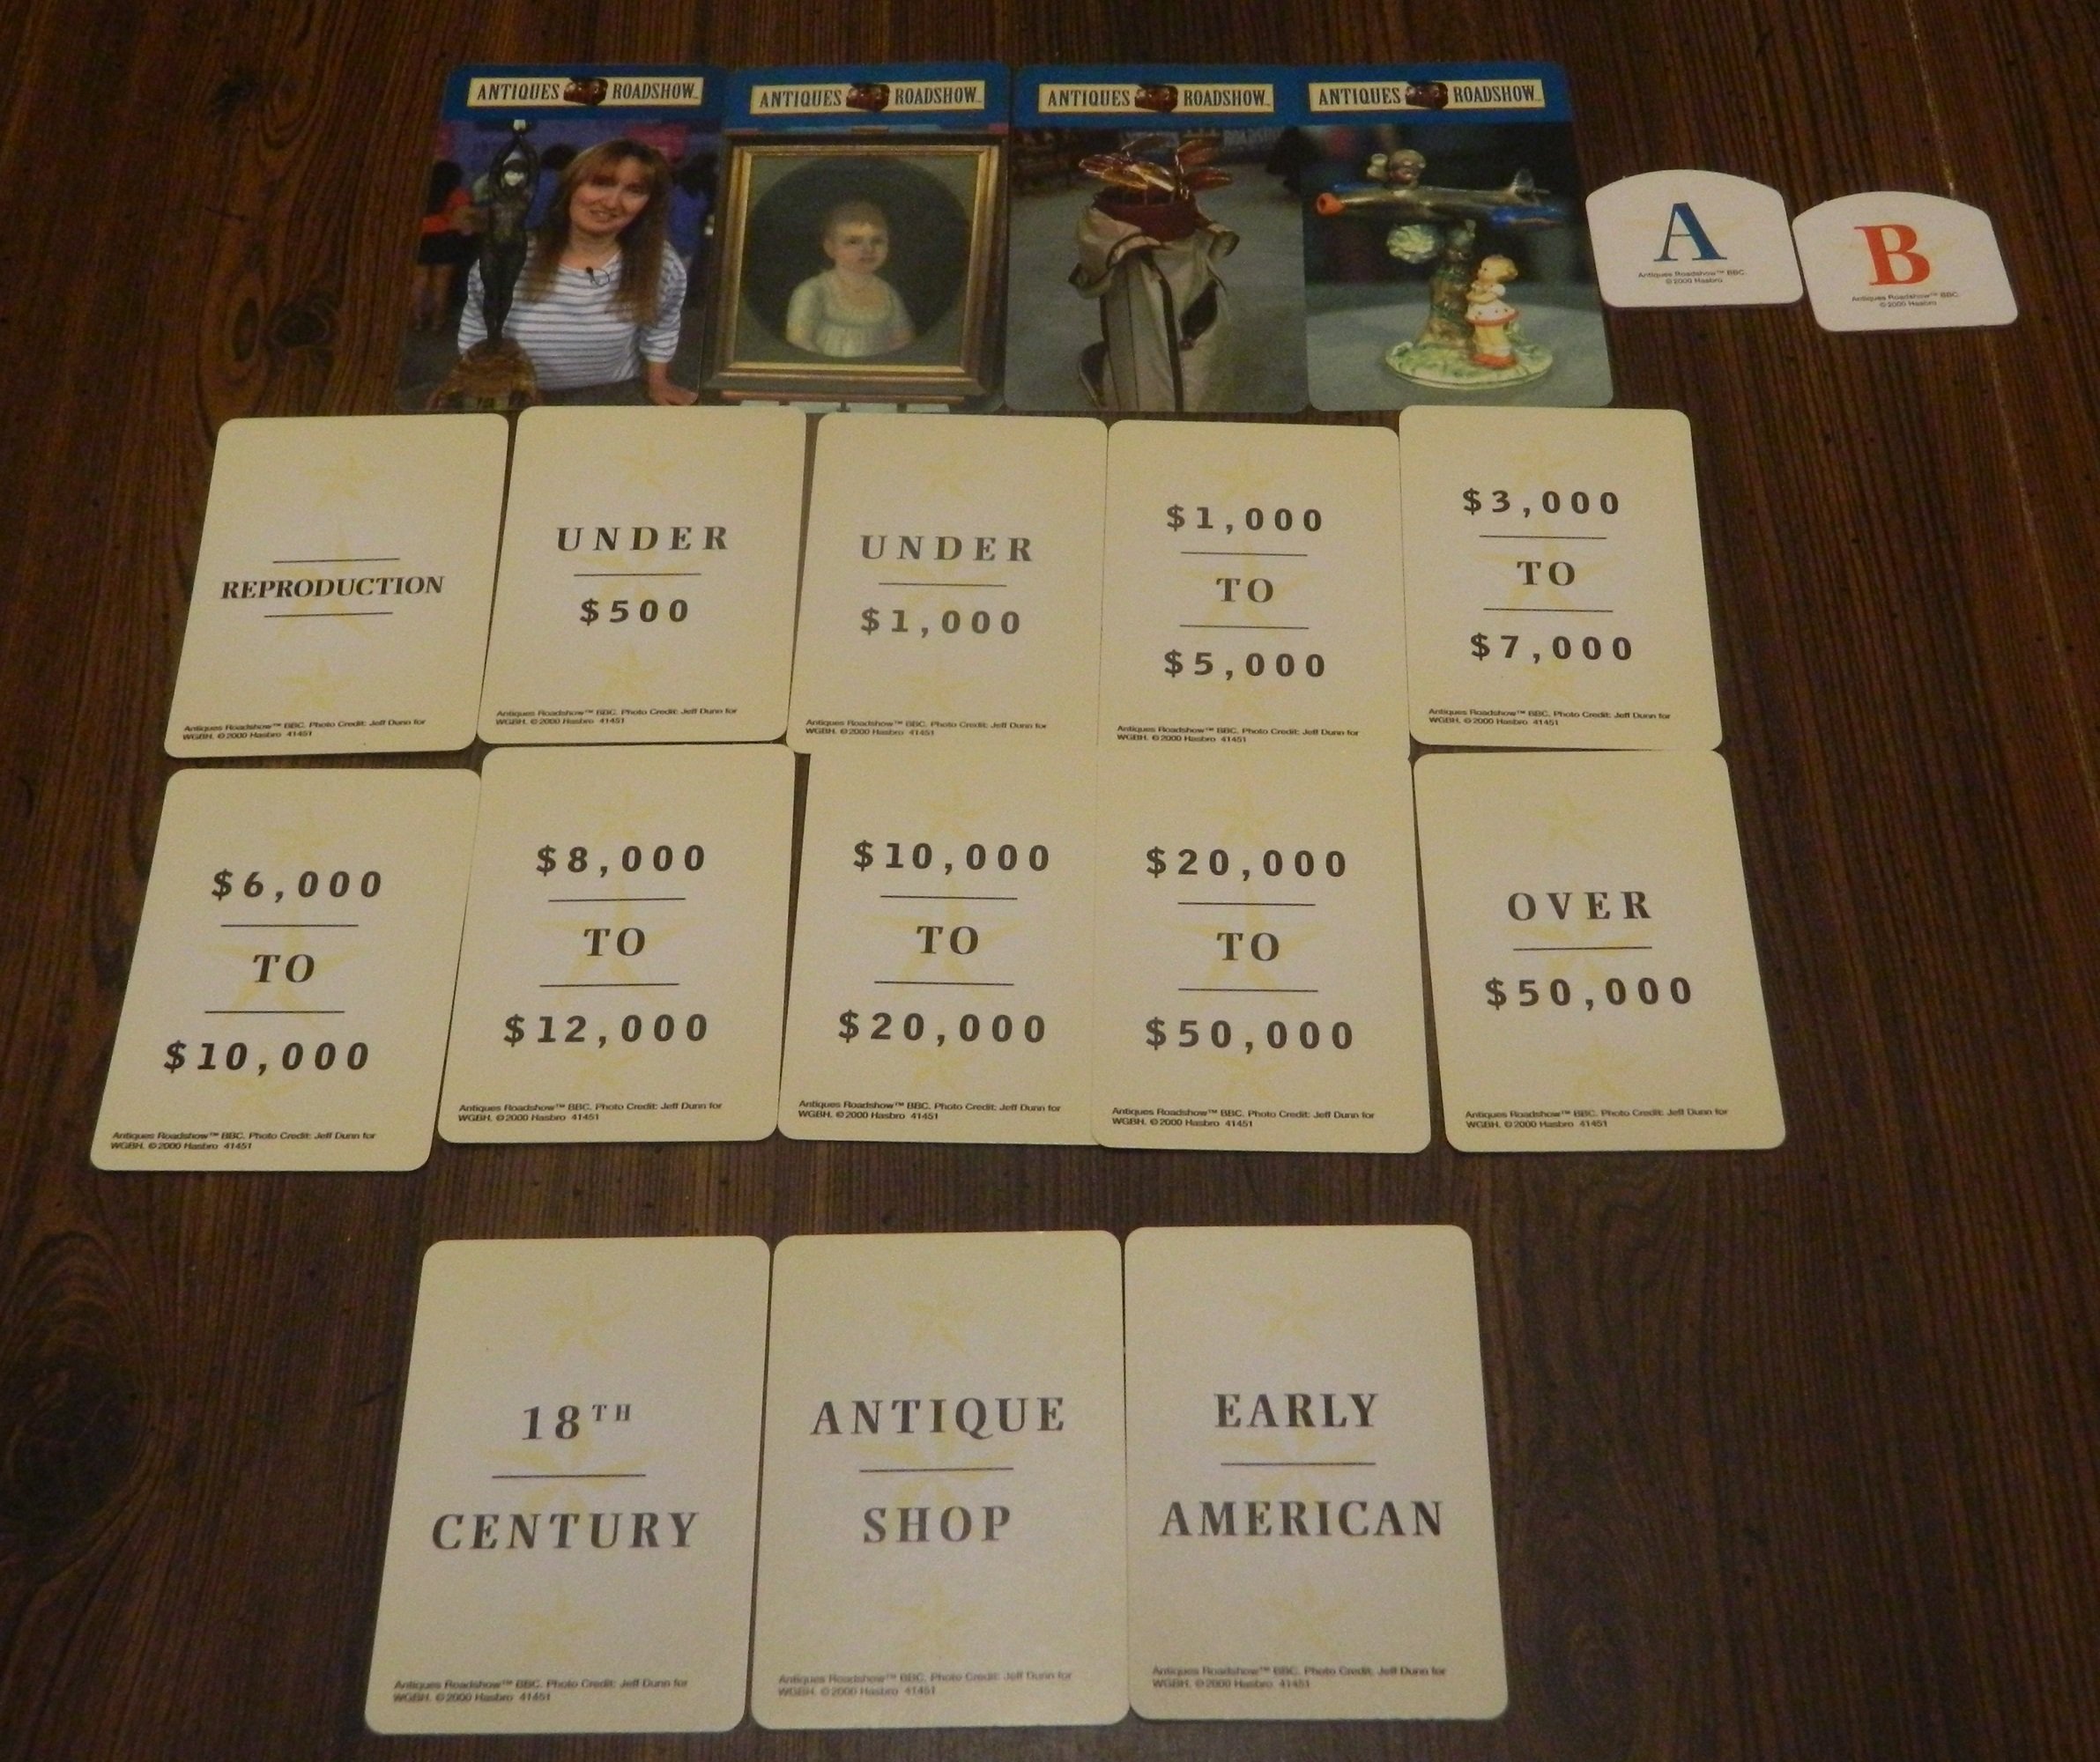 Antiques Roadshow The Game a Collectible Treasure Hunt Hasbro 2000 for sale online 